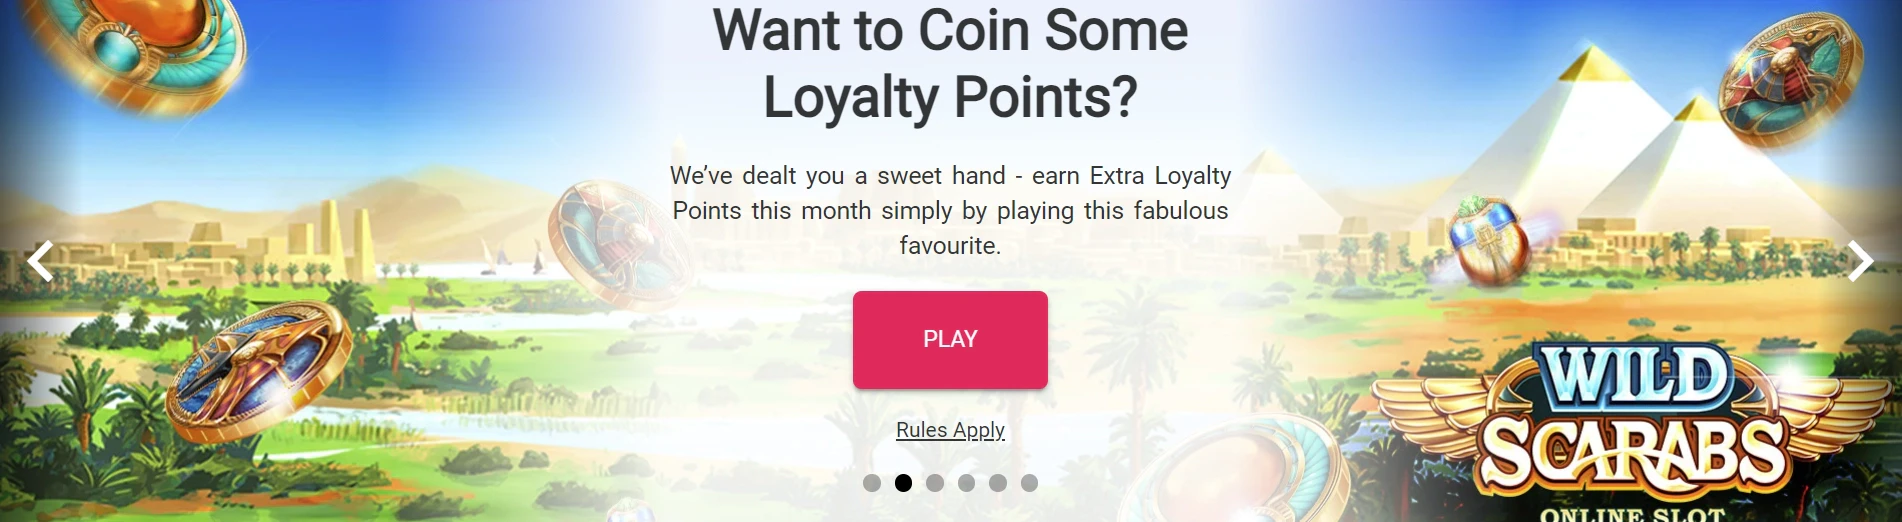 Spin Casino Loyalty Points